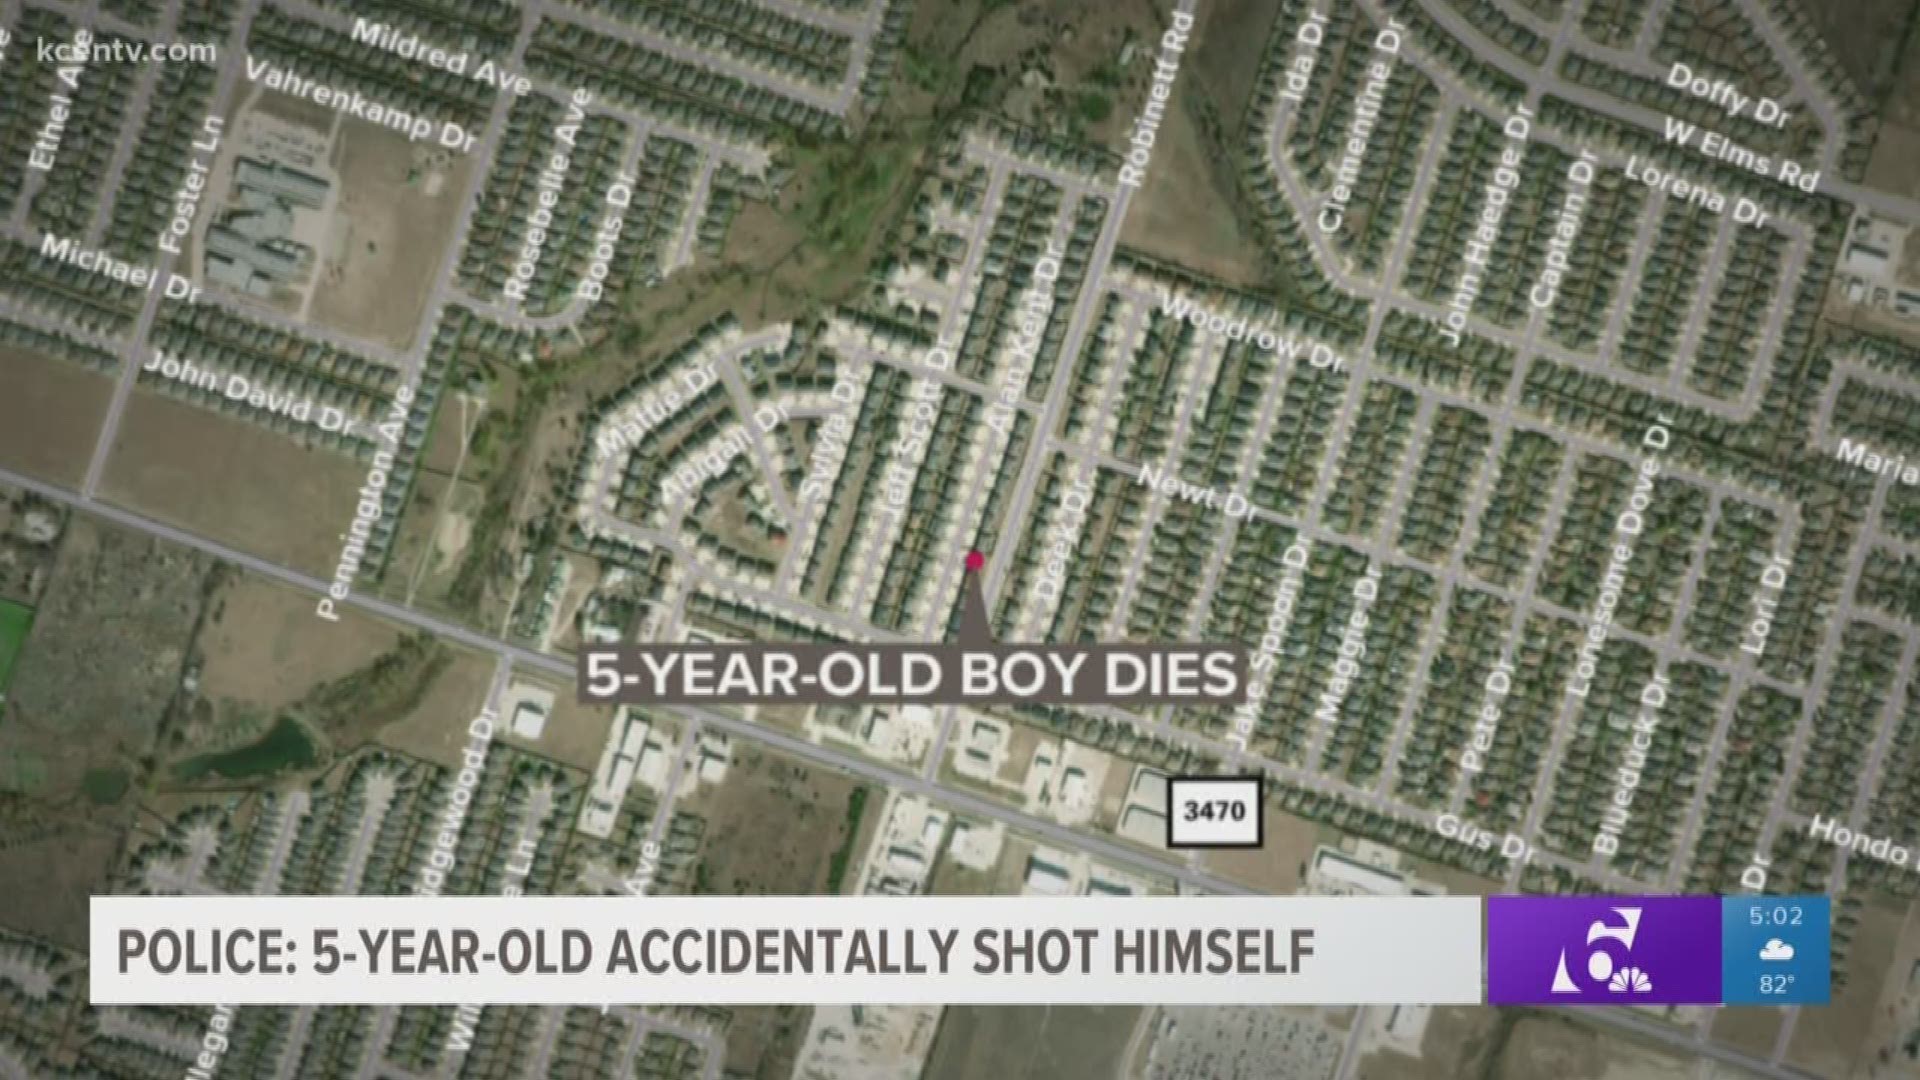 Killeen police confirmed Wednesday the boy got a hold of a loaded gun and accidentally shot himself in the head.